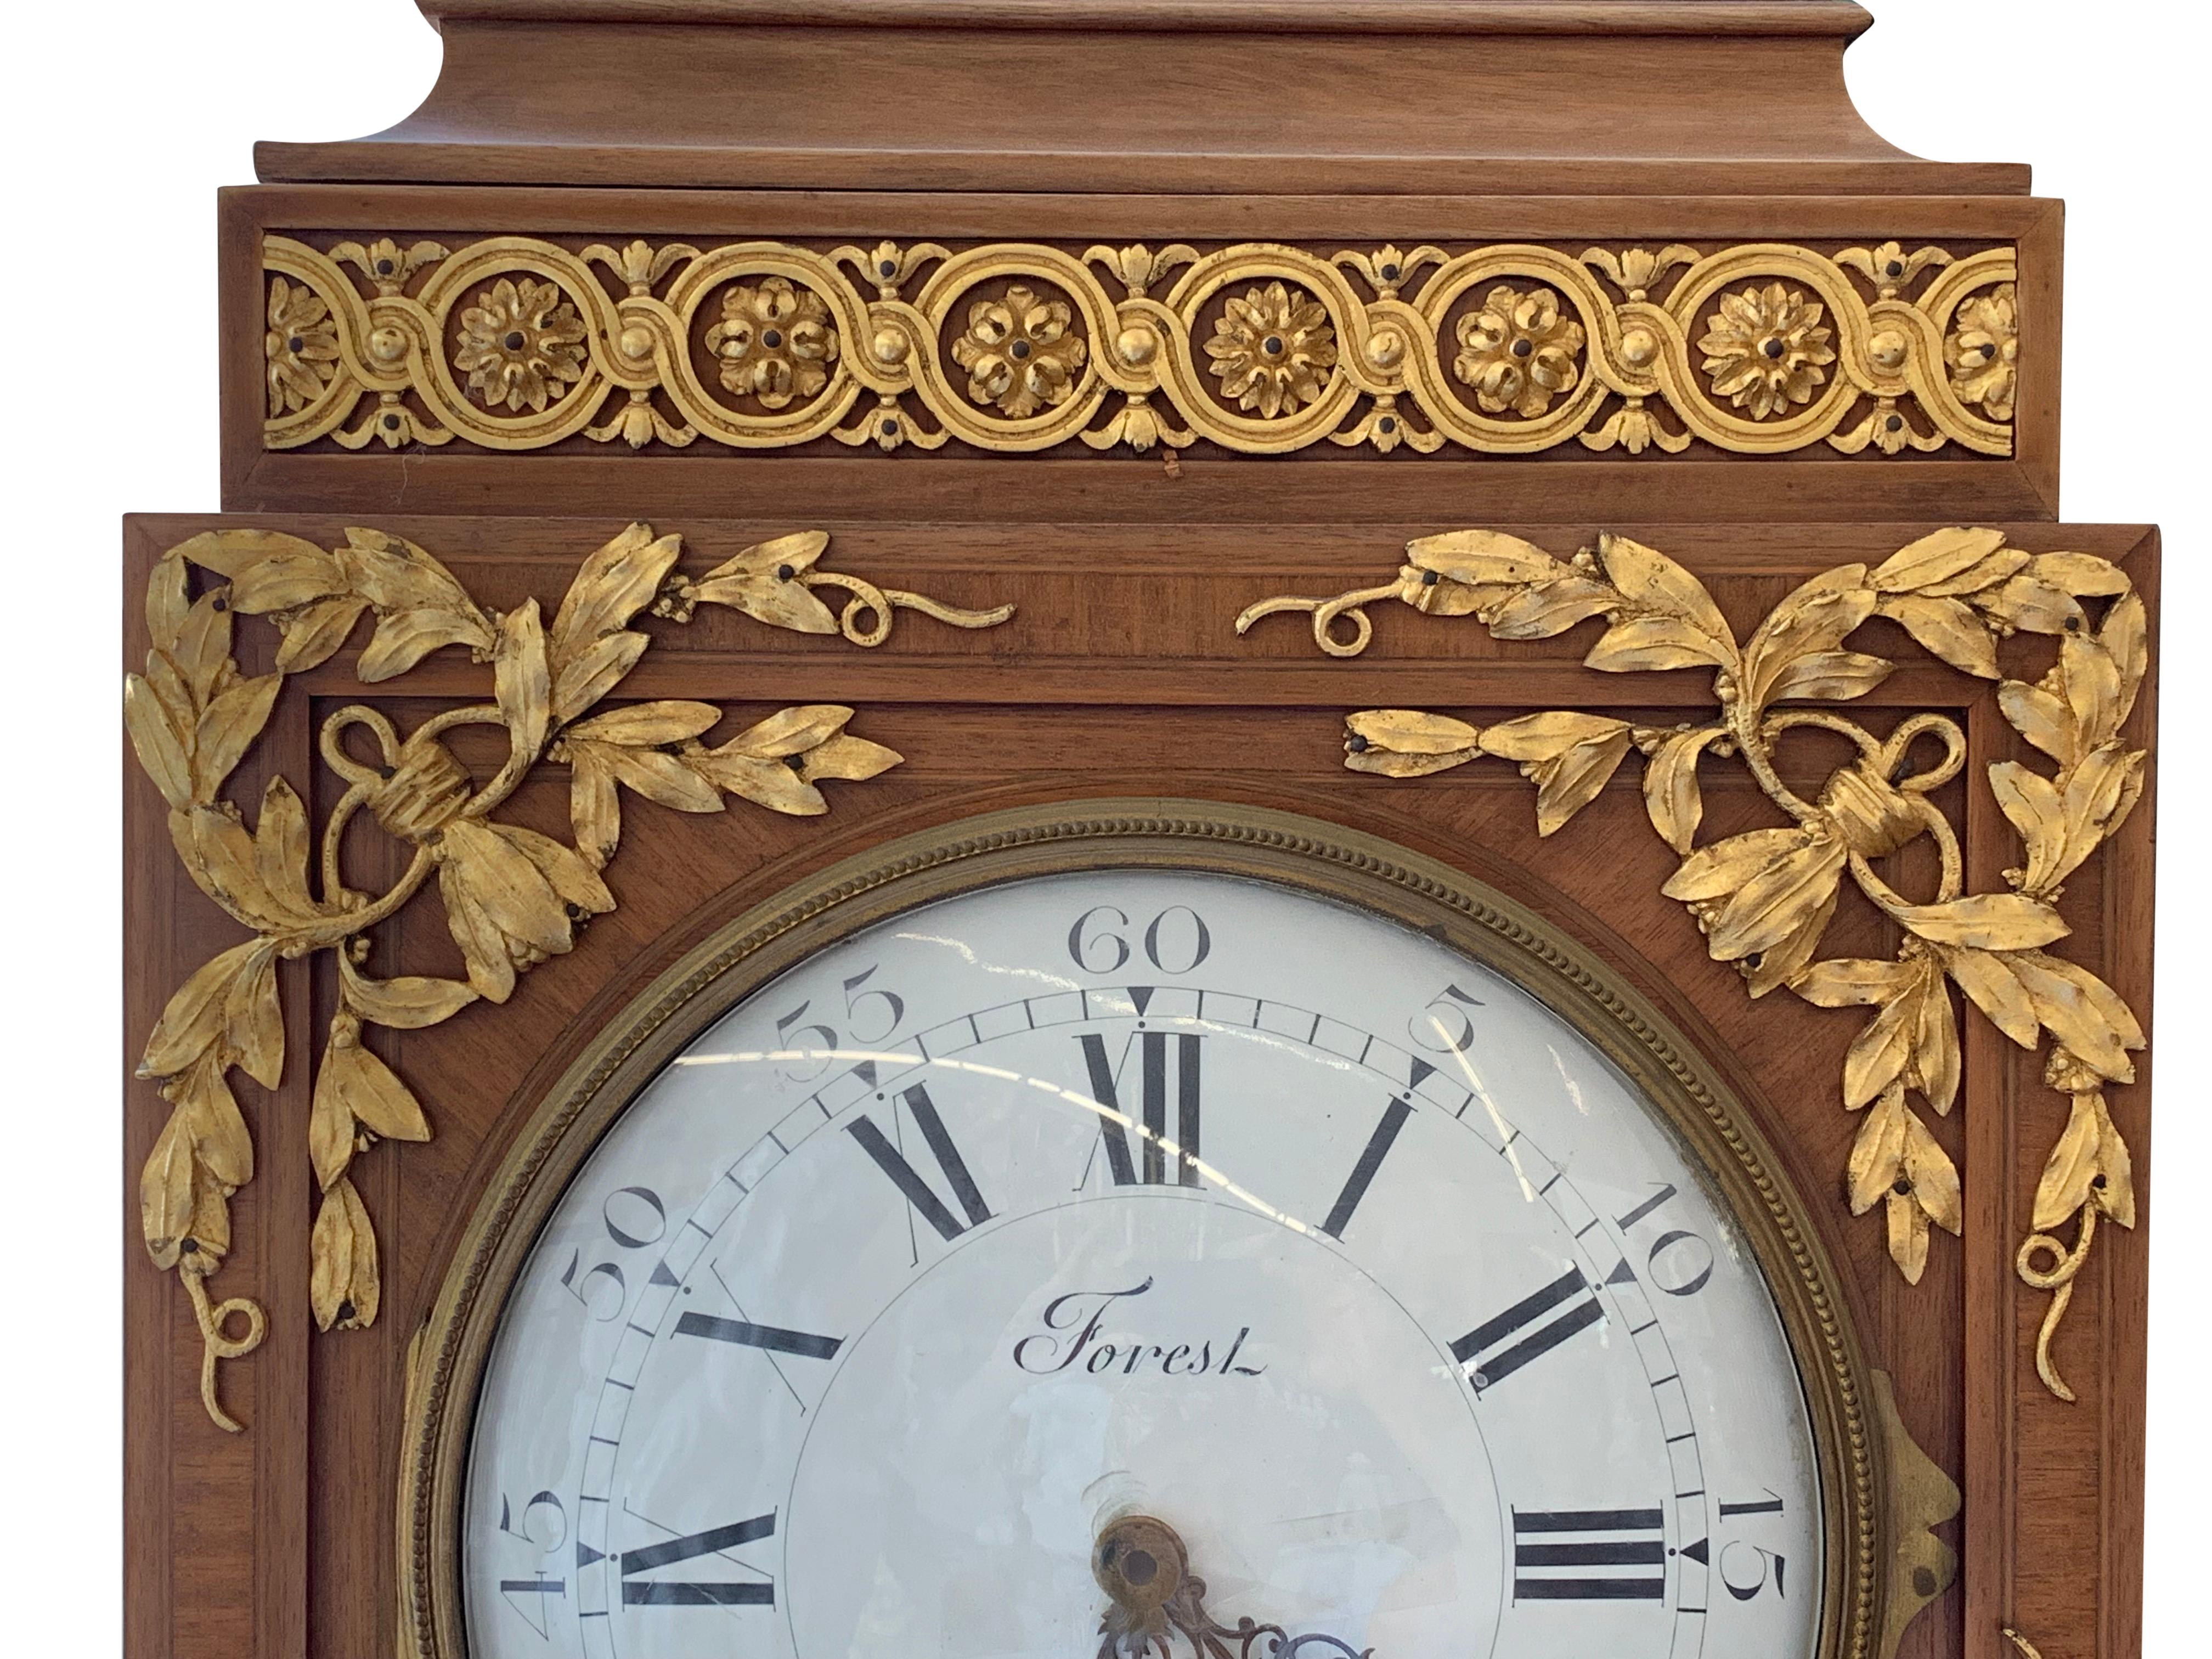 Late 19th Century French Louis XVI Style Gilt-Bronze Mounted Grandfather Clock For Sale 7